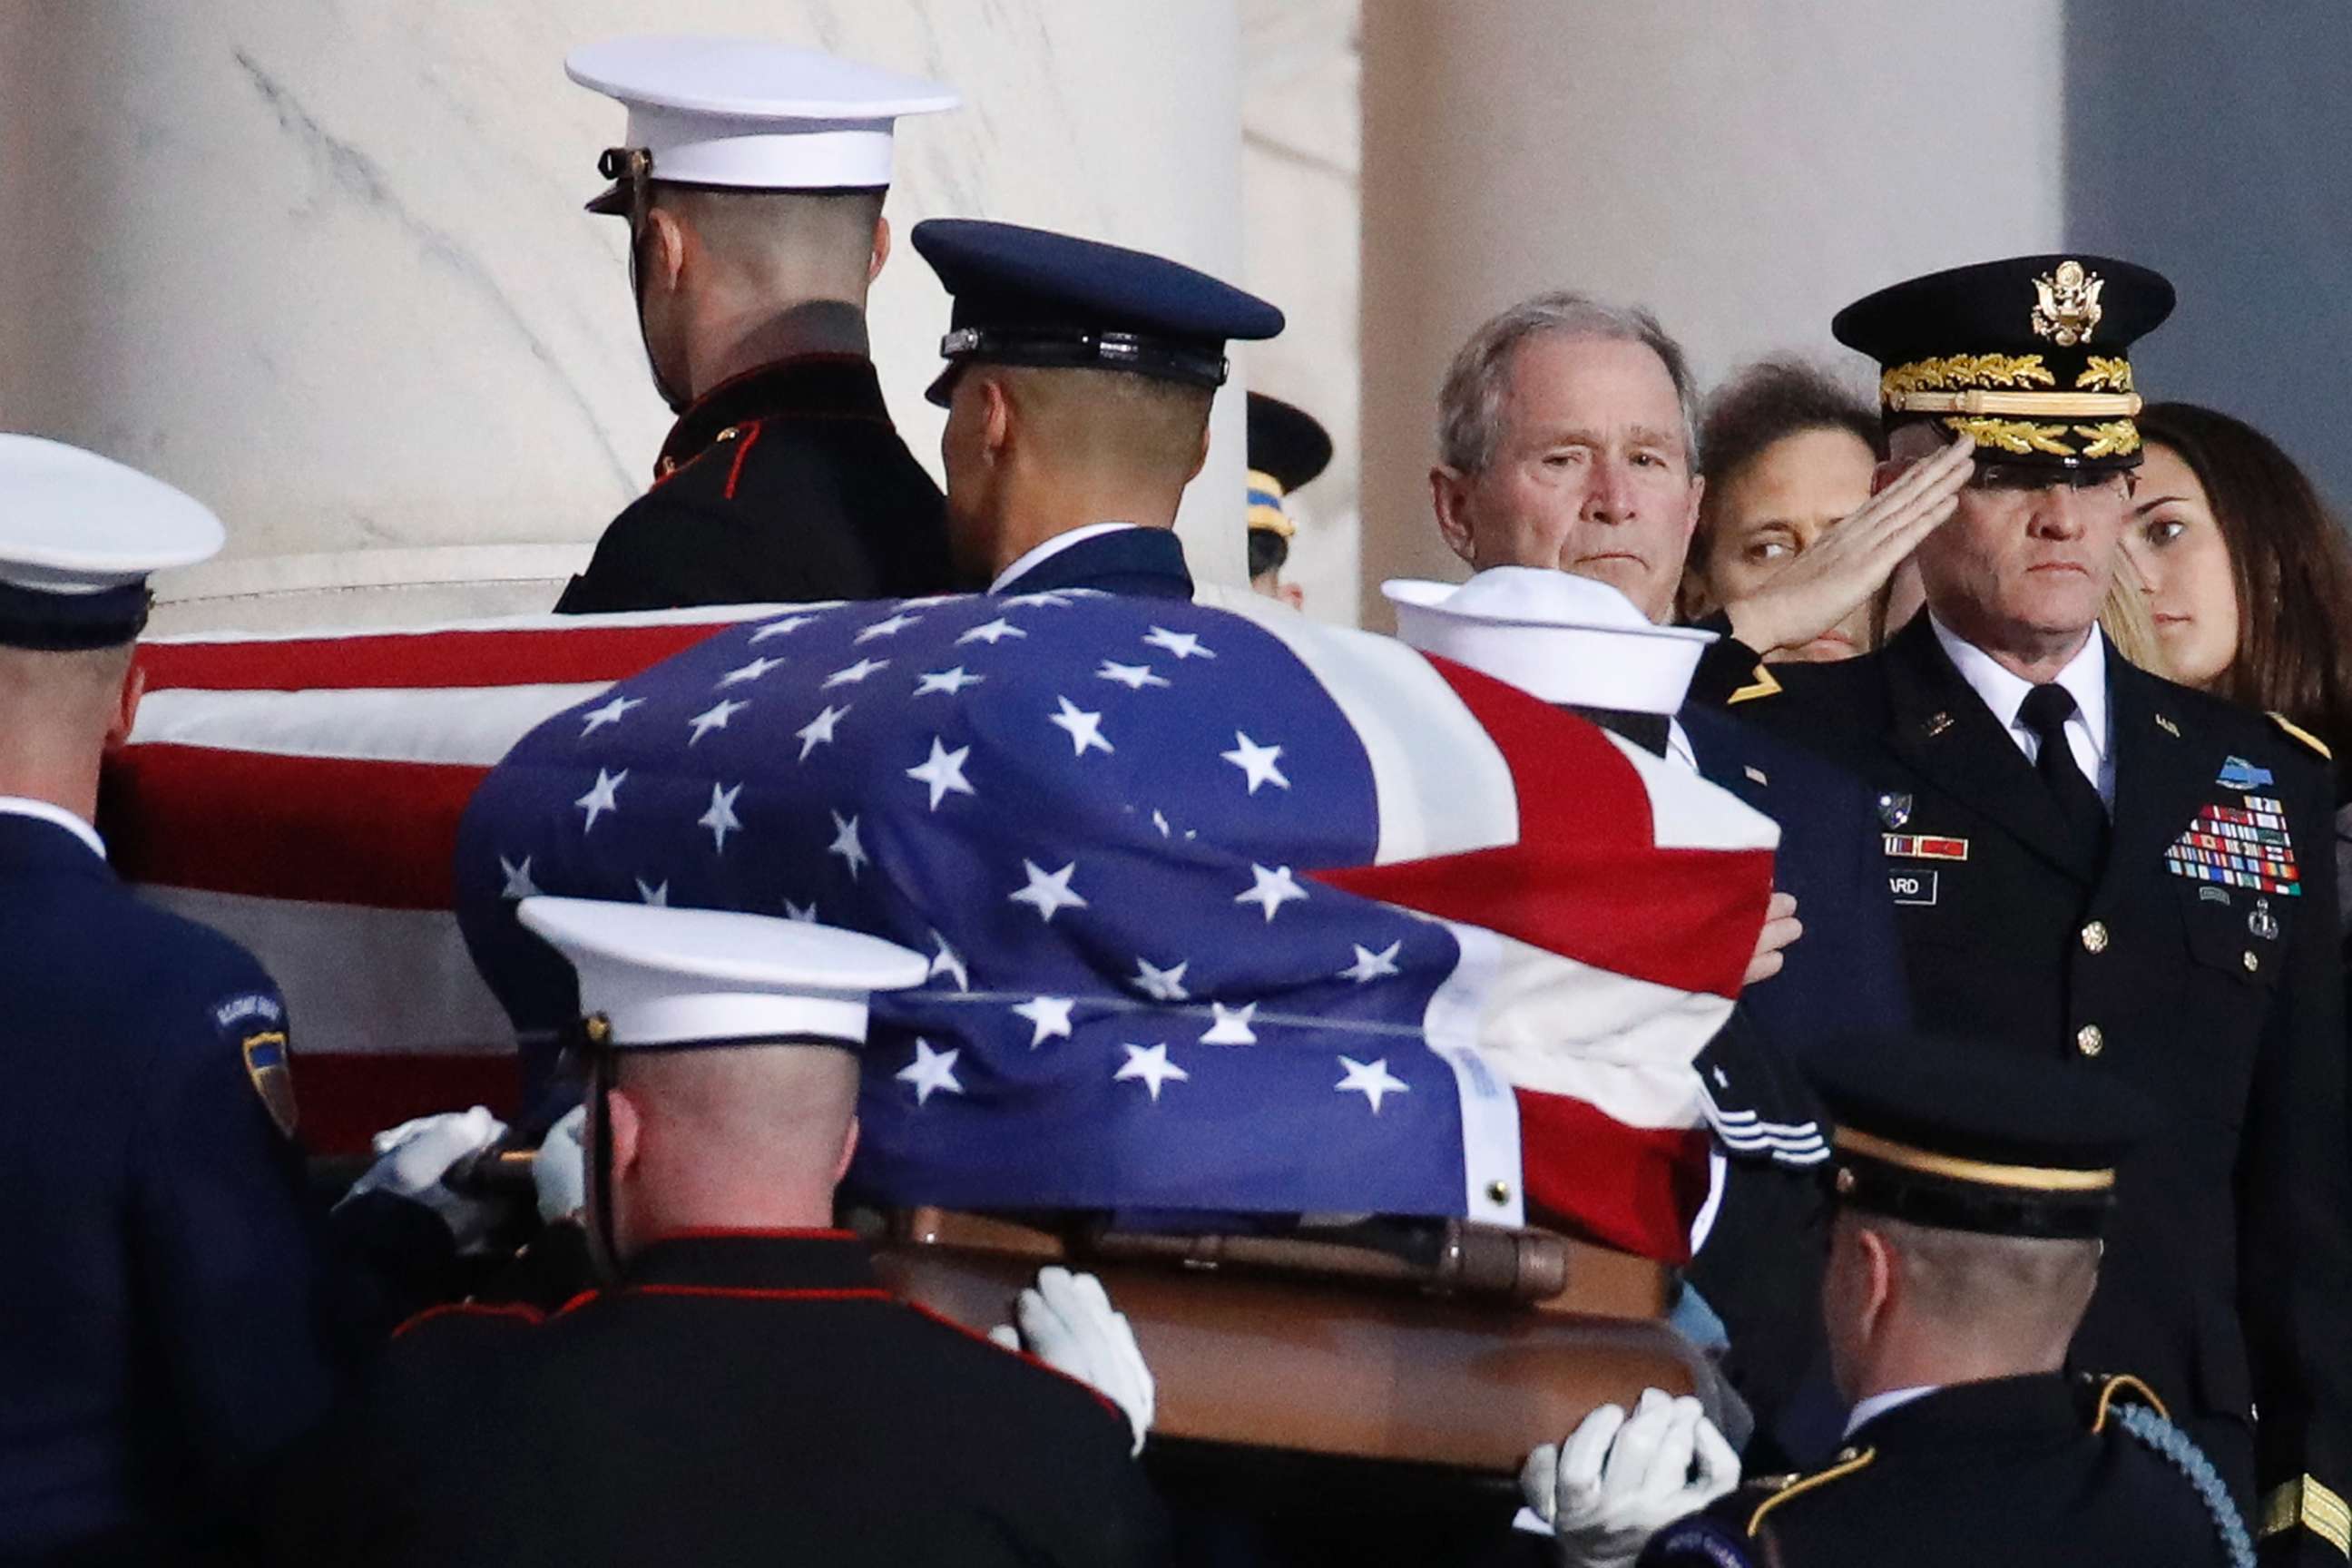 PHOTO: Former President George W. Bush watches as the flag-draped casket of his father, former President George H.W. Bush is carried by a joint services military honor guard to lie in state in the rotunda of the U.S. Capitol, Dec. 3, 2018, in Washington.